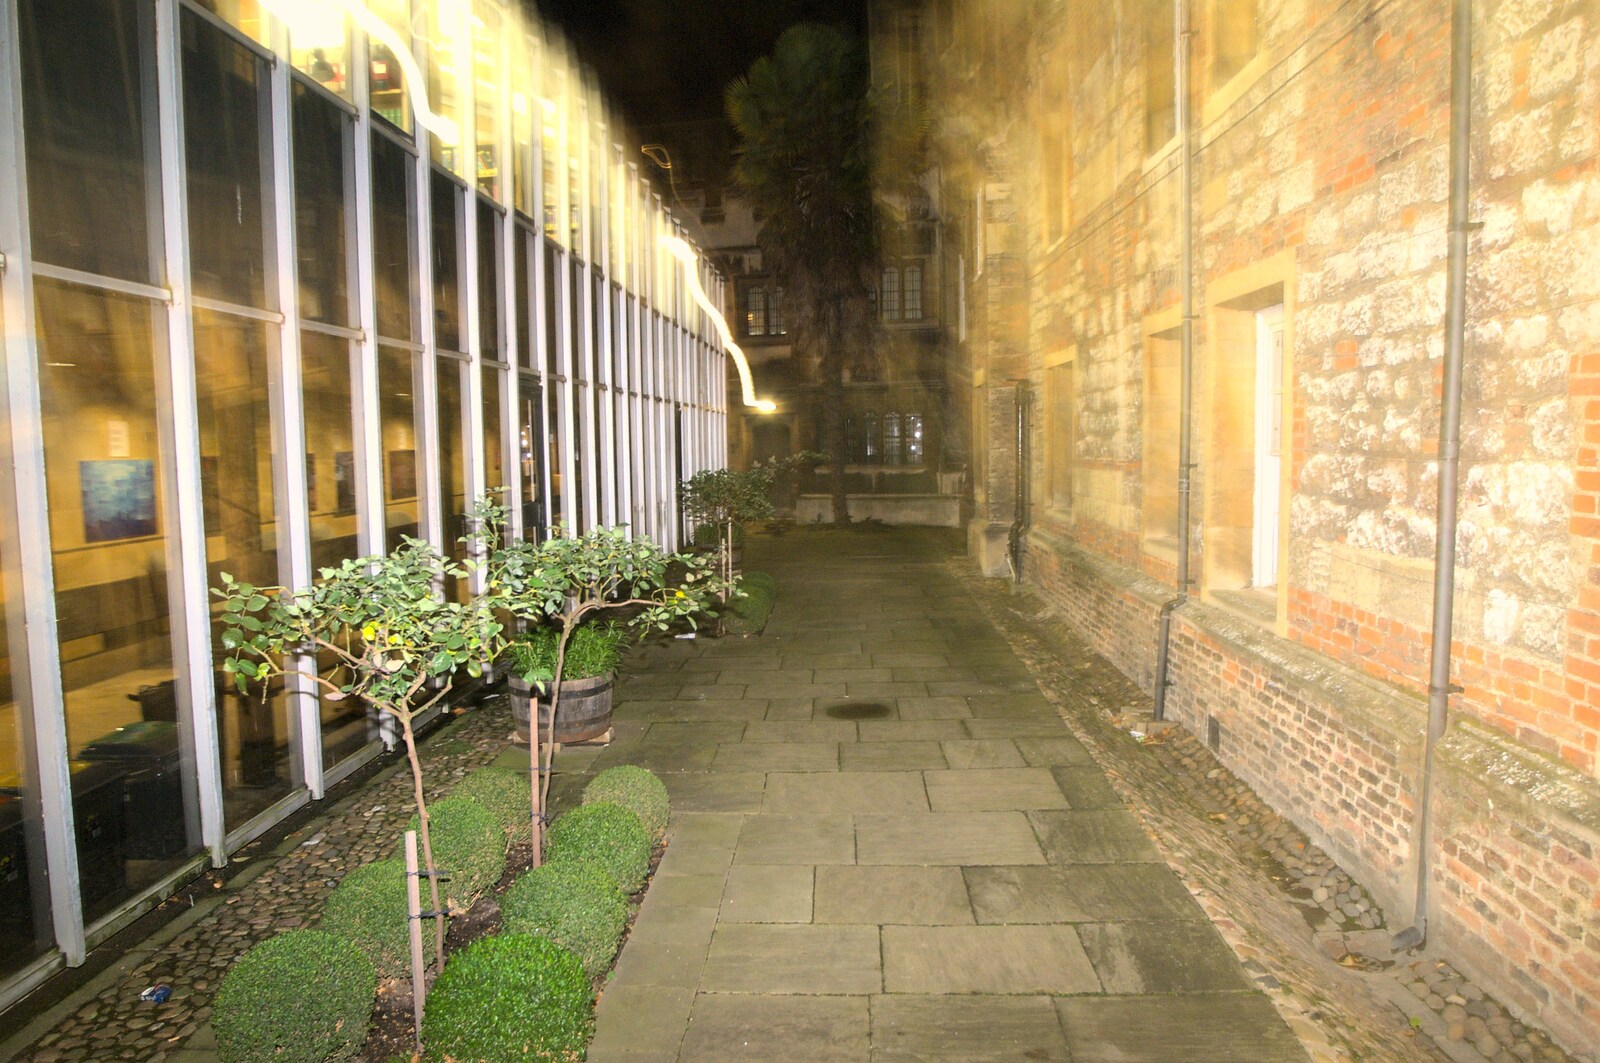 A college back alley, near the library from A Qualcomm Christmas, Christ's College, Cambridge - 8th December 2011